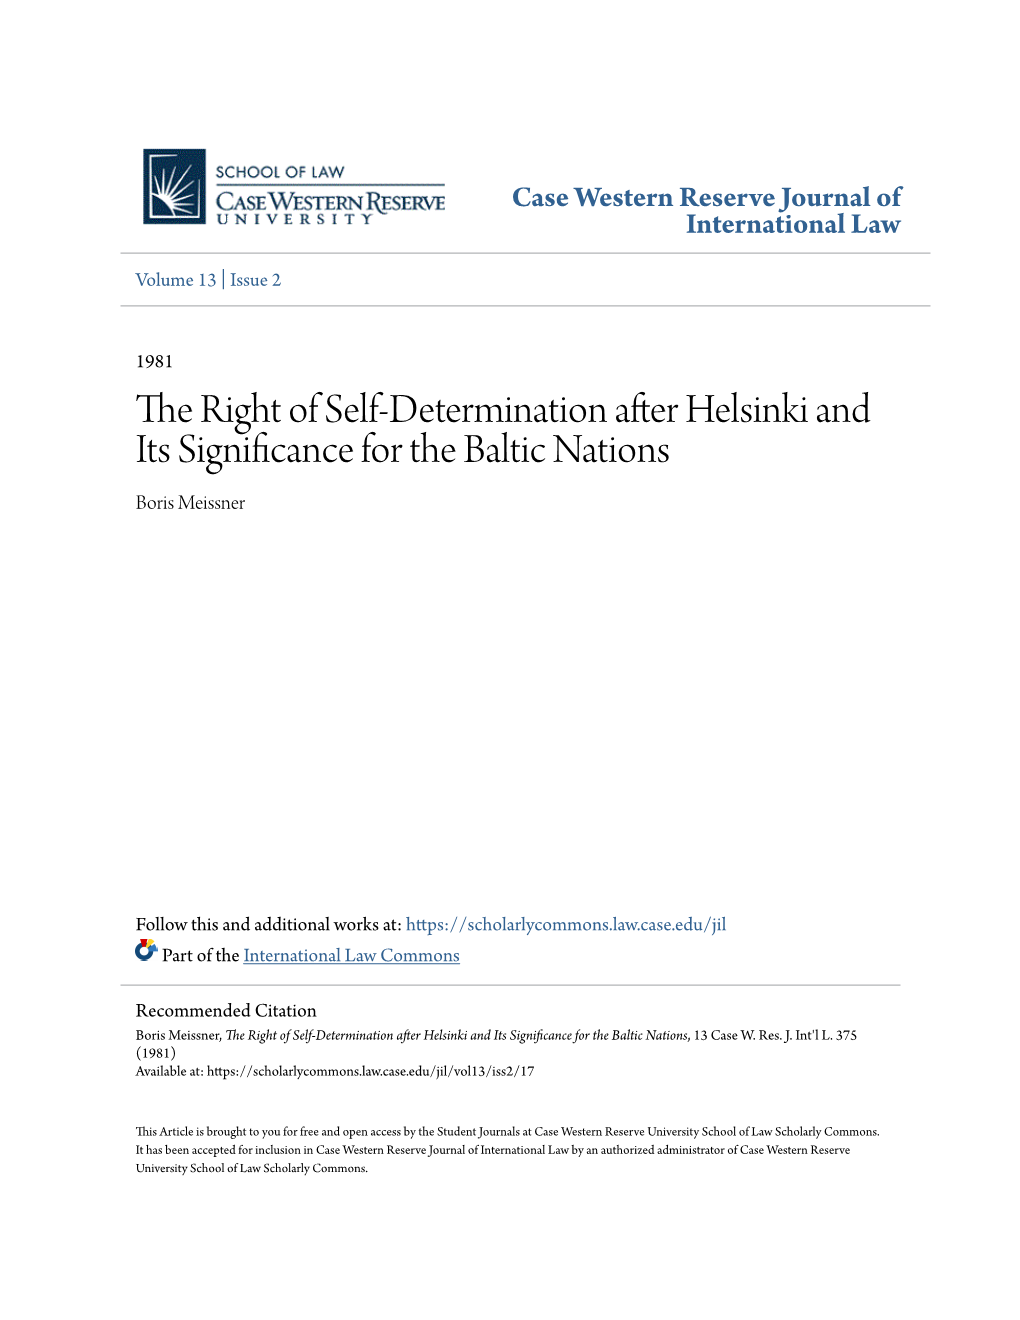 The Right of Self-Determination After Helsinki and Its Significance for the Baltic Nations Boris Meissner